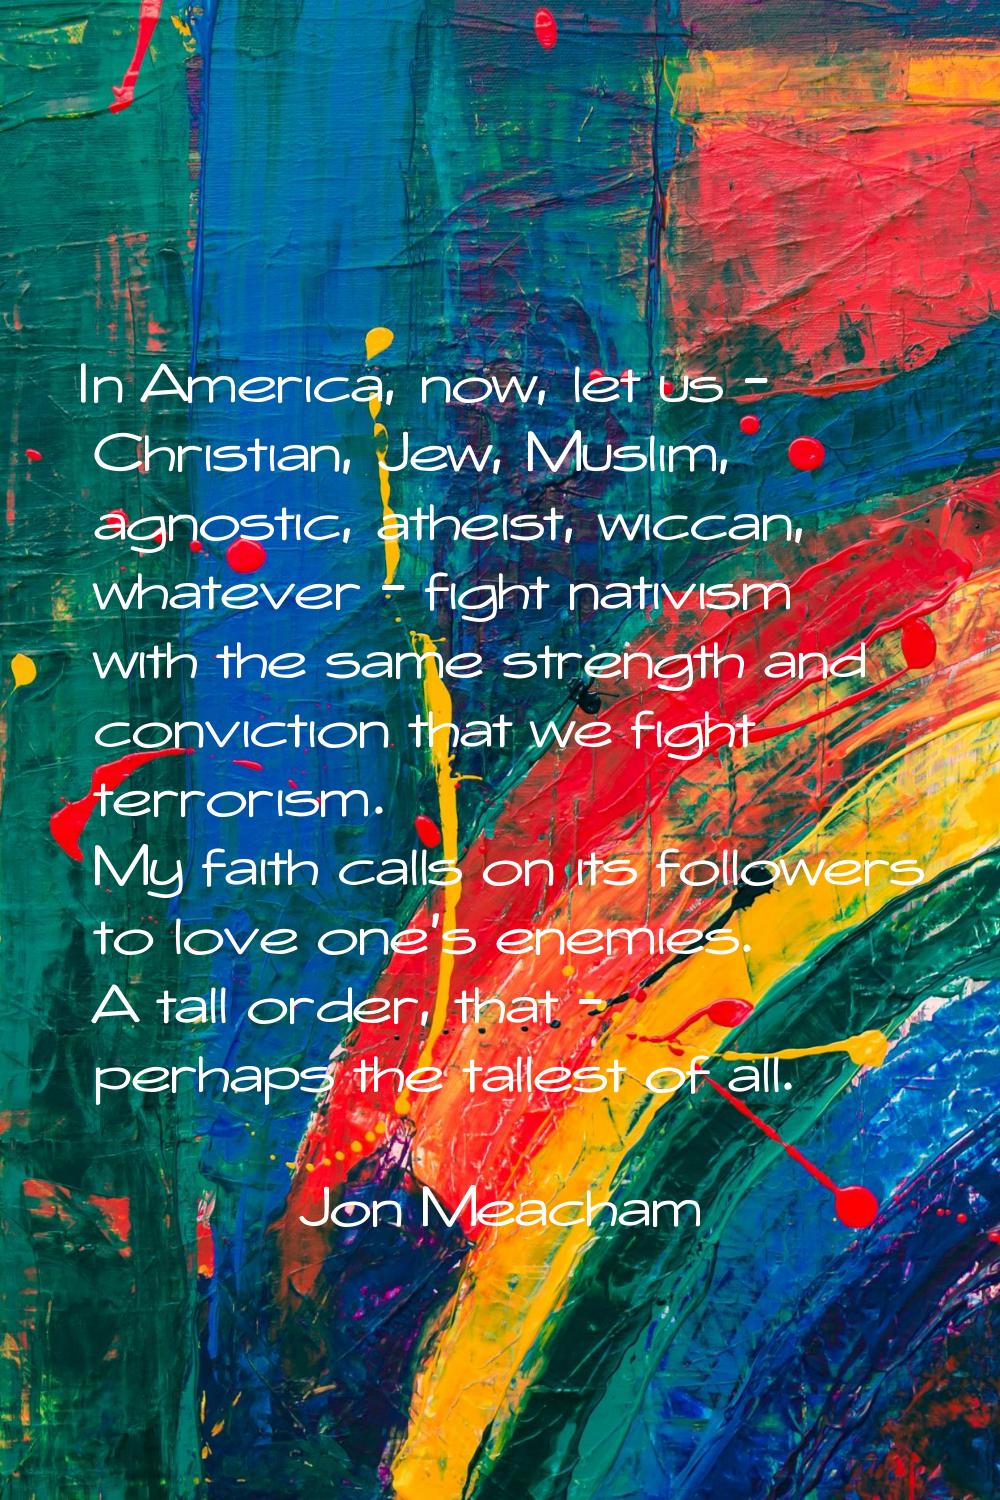 In America, now, let us - Christian, Jew, Muslim, agnostic, atheist, wiccan, whatever - fight nativ